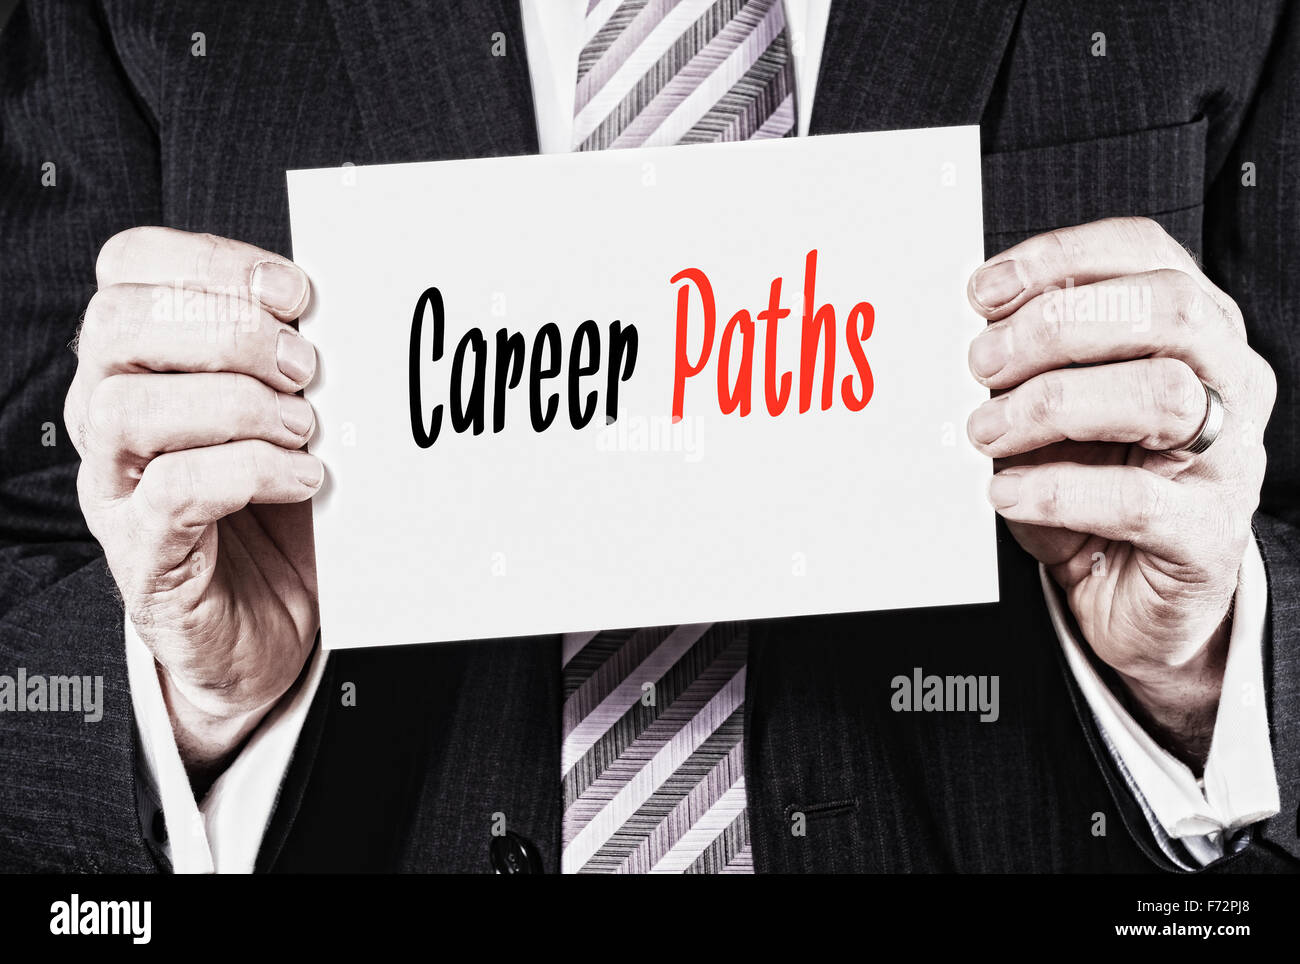 Career Paths, Induction Training headlines concept. Stock Photo